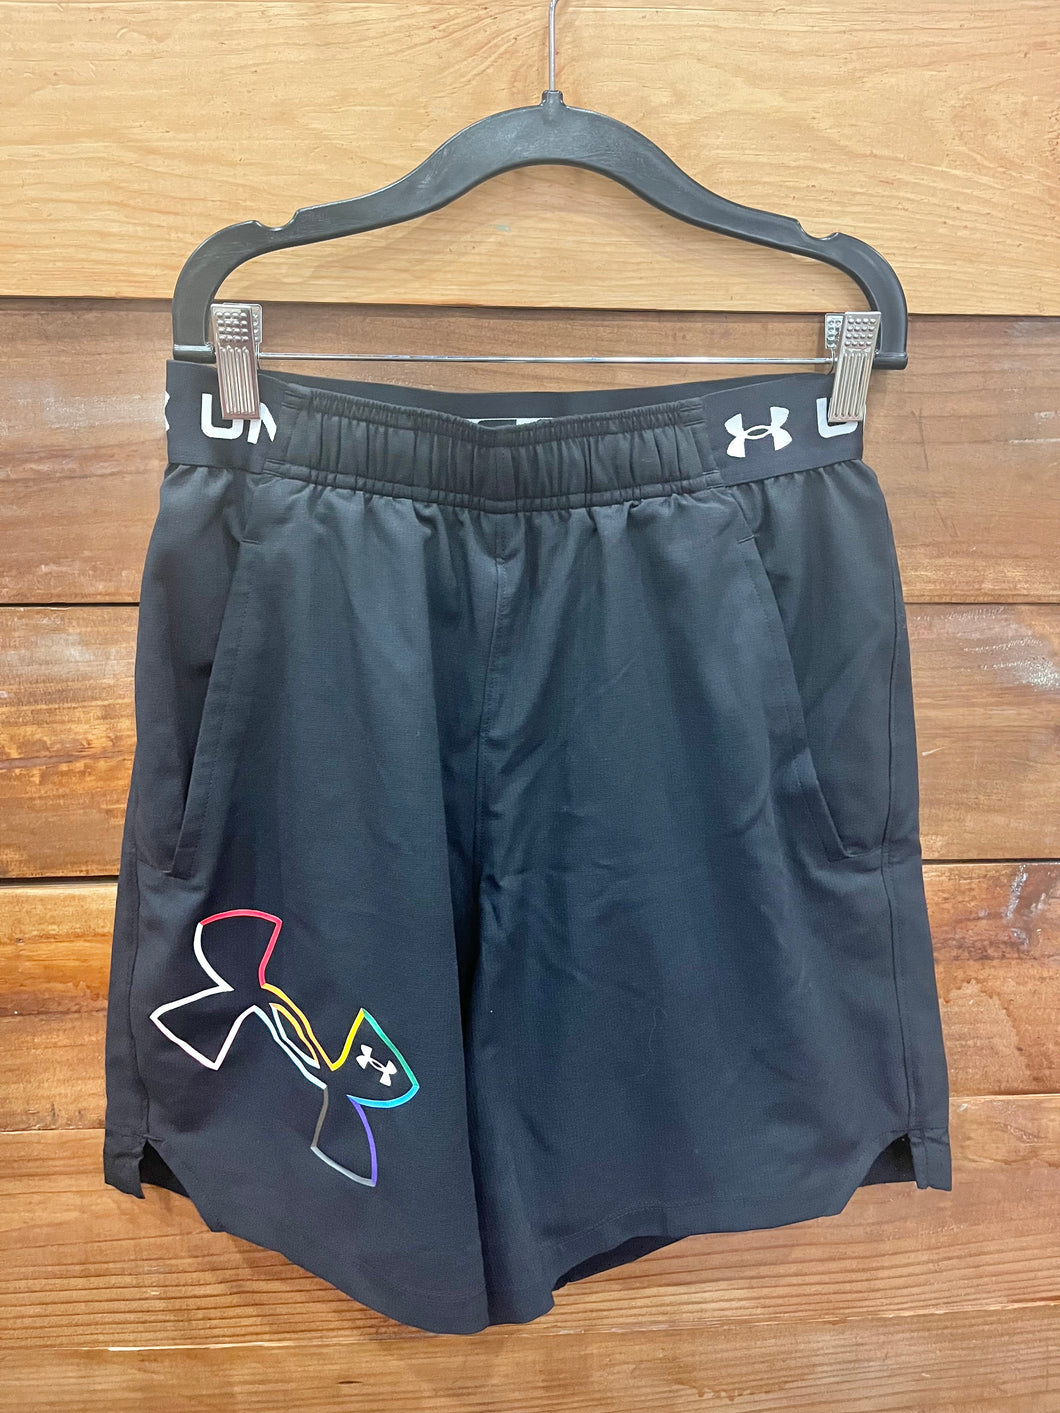 Under Armour Black Shorts Size Small